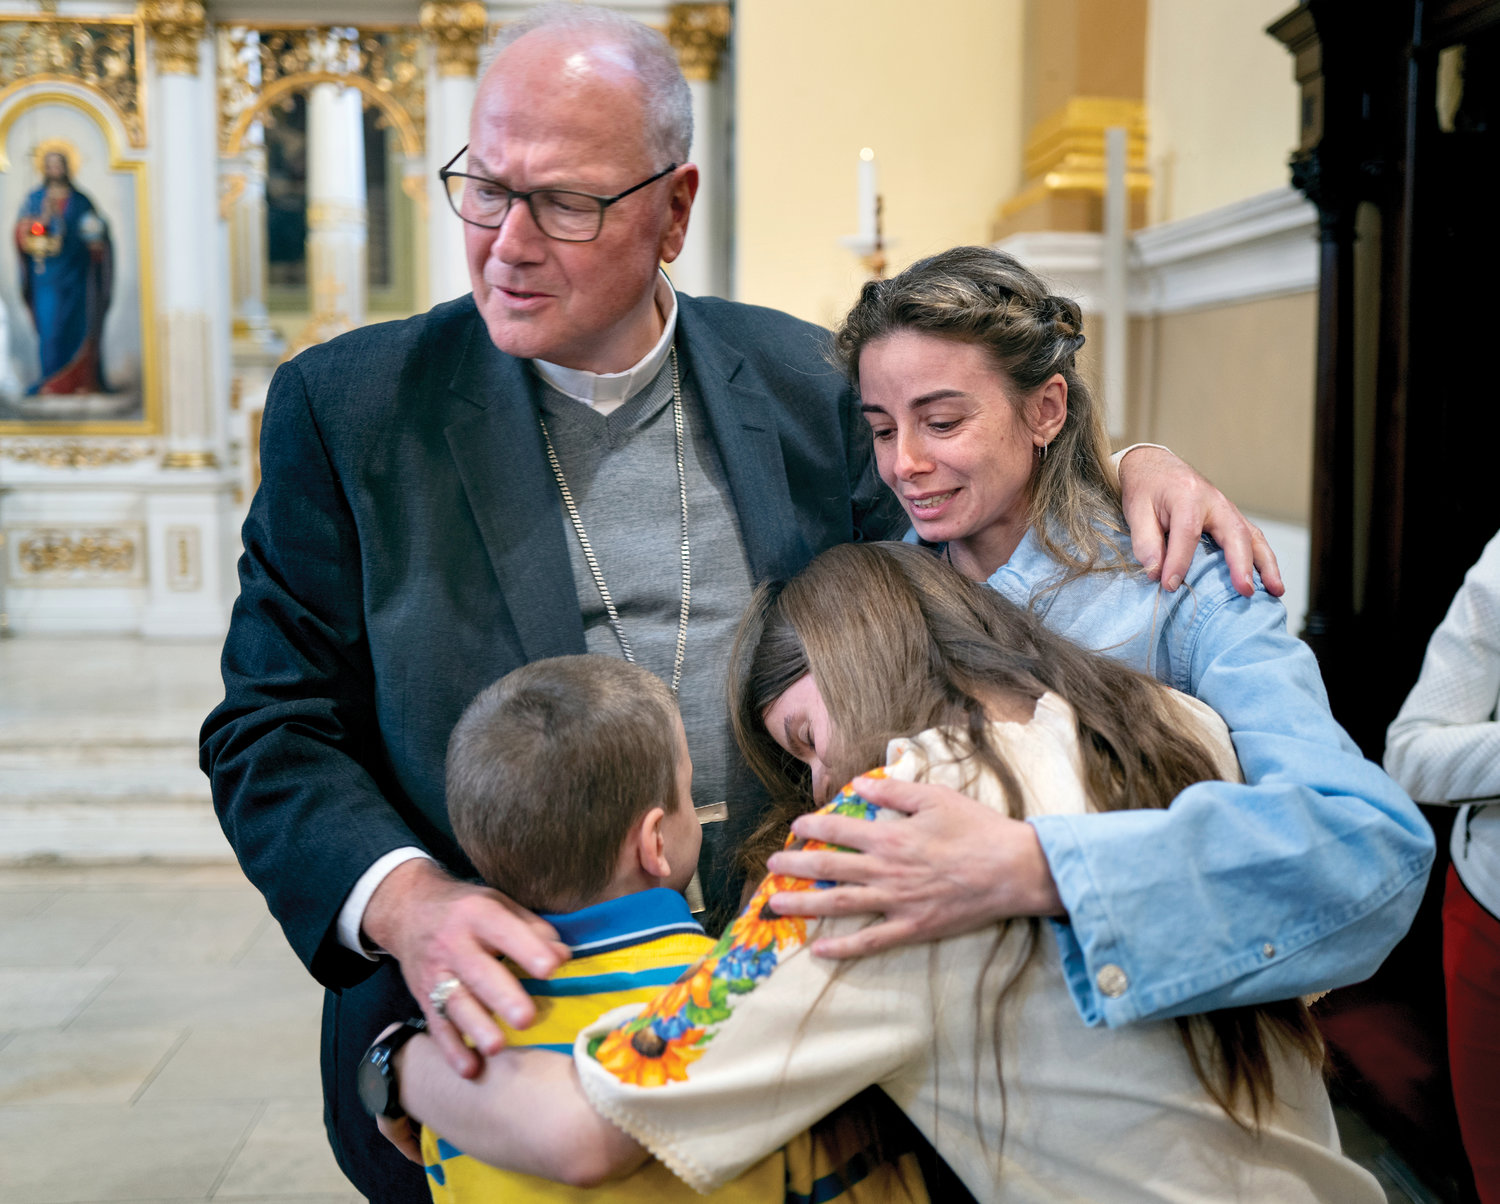 Cardinal Dolan embraces Katarina Leshenka of Kiev and two of her three children as he greeted Ukranian refugees at the Eparchy of Košice Slovak Greek Catholic Church  in Slovakia April 30. The cardinal led a New York Church delegation on a trip to Poland, Slovakia and Ukraine, where they met with refugees and saluted aid workers assisting them.